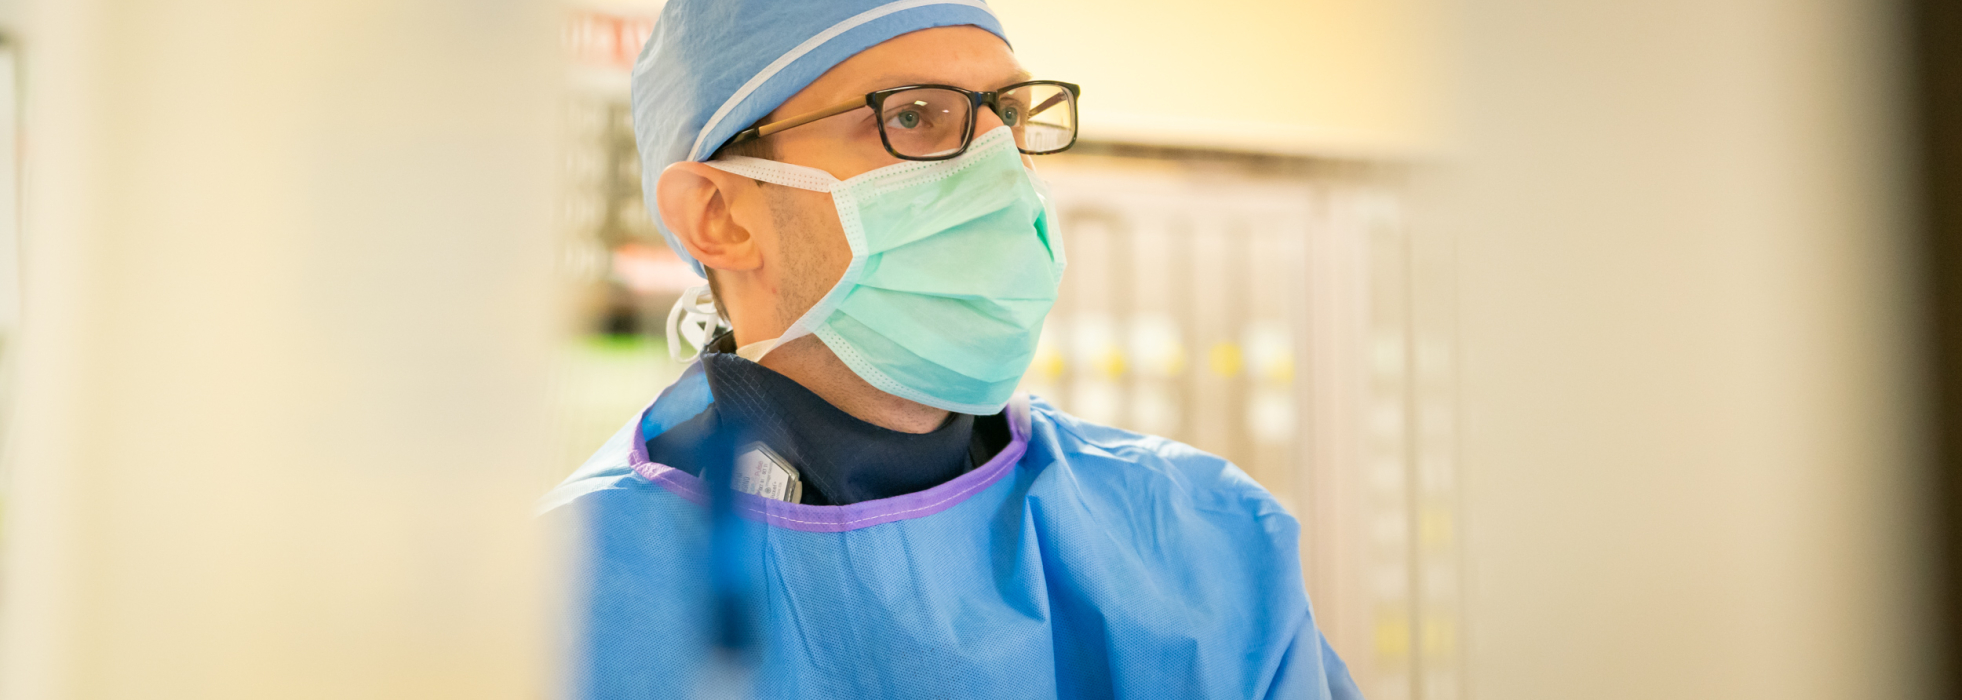 Closeup of cardiovascular medicine fellow wearing a surgical cap, gown and mask working in the cath lab